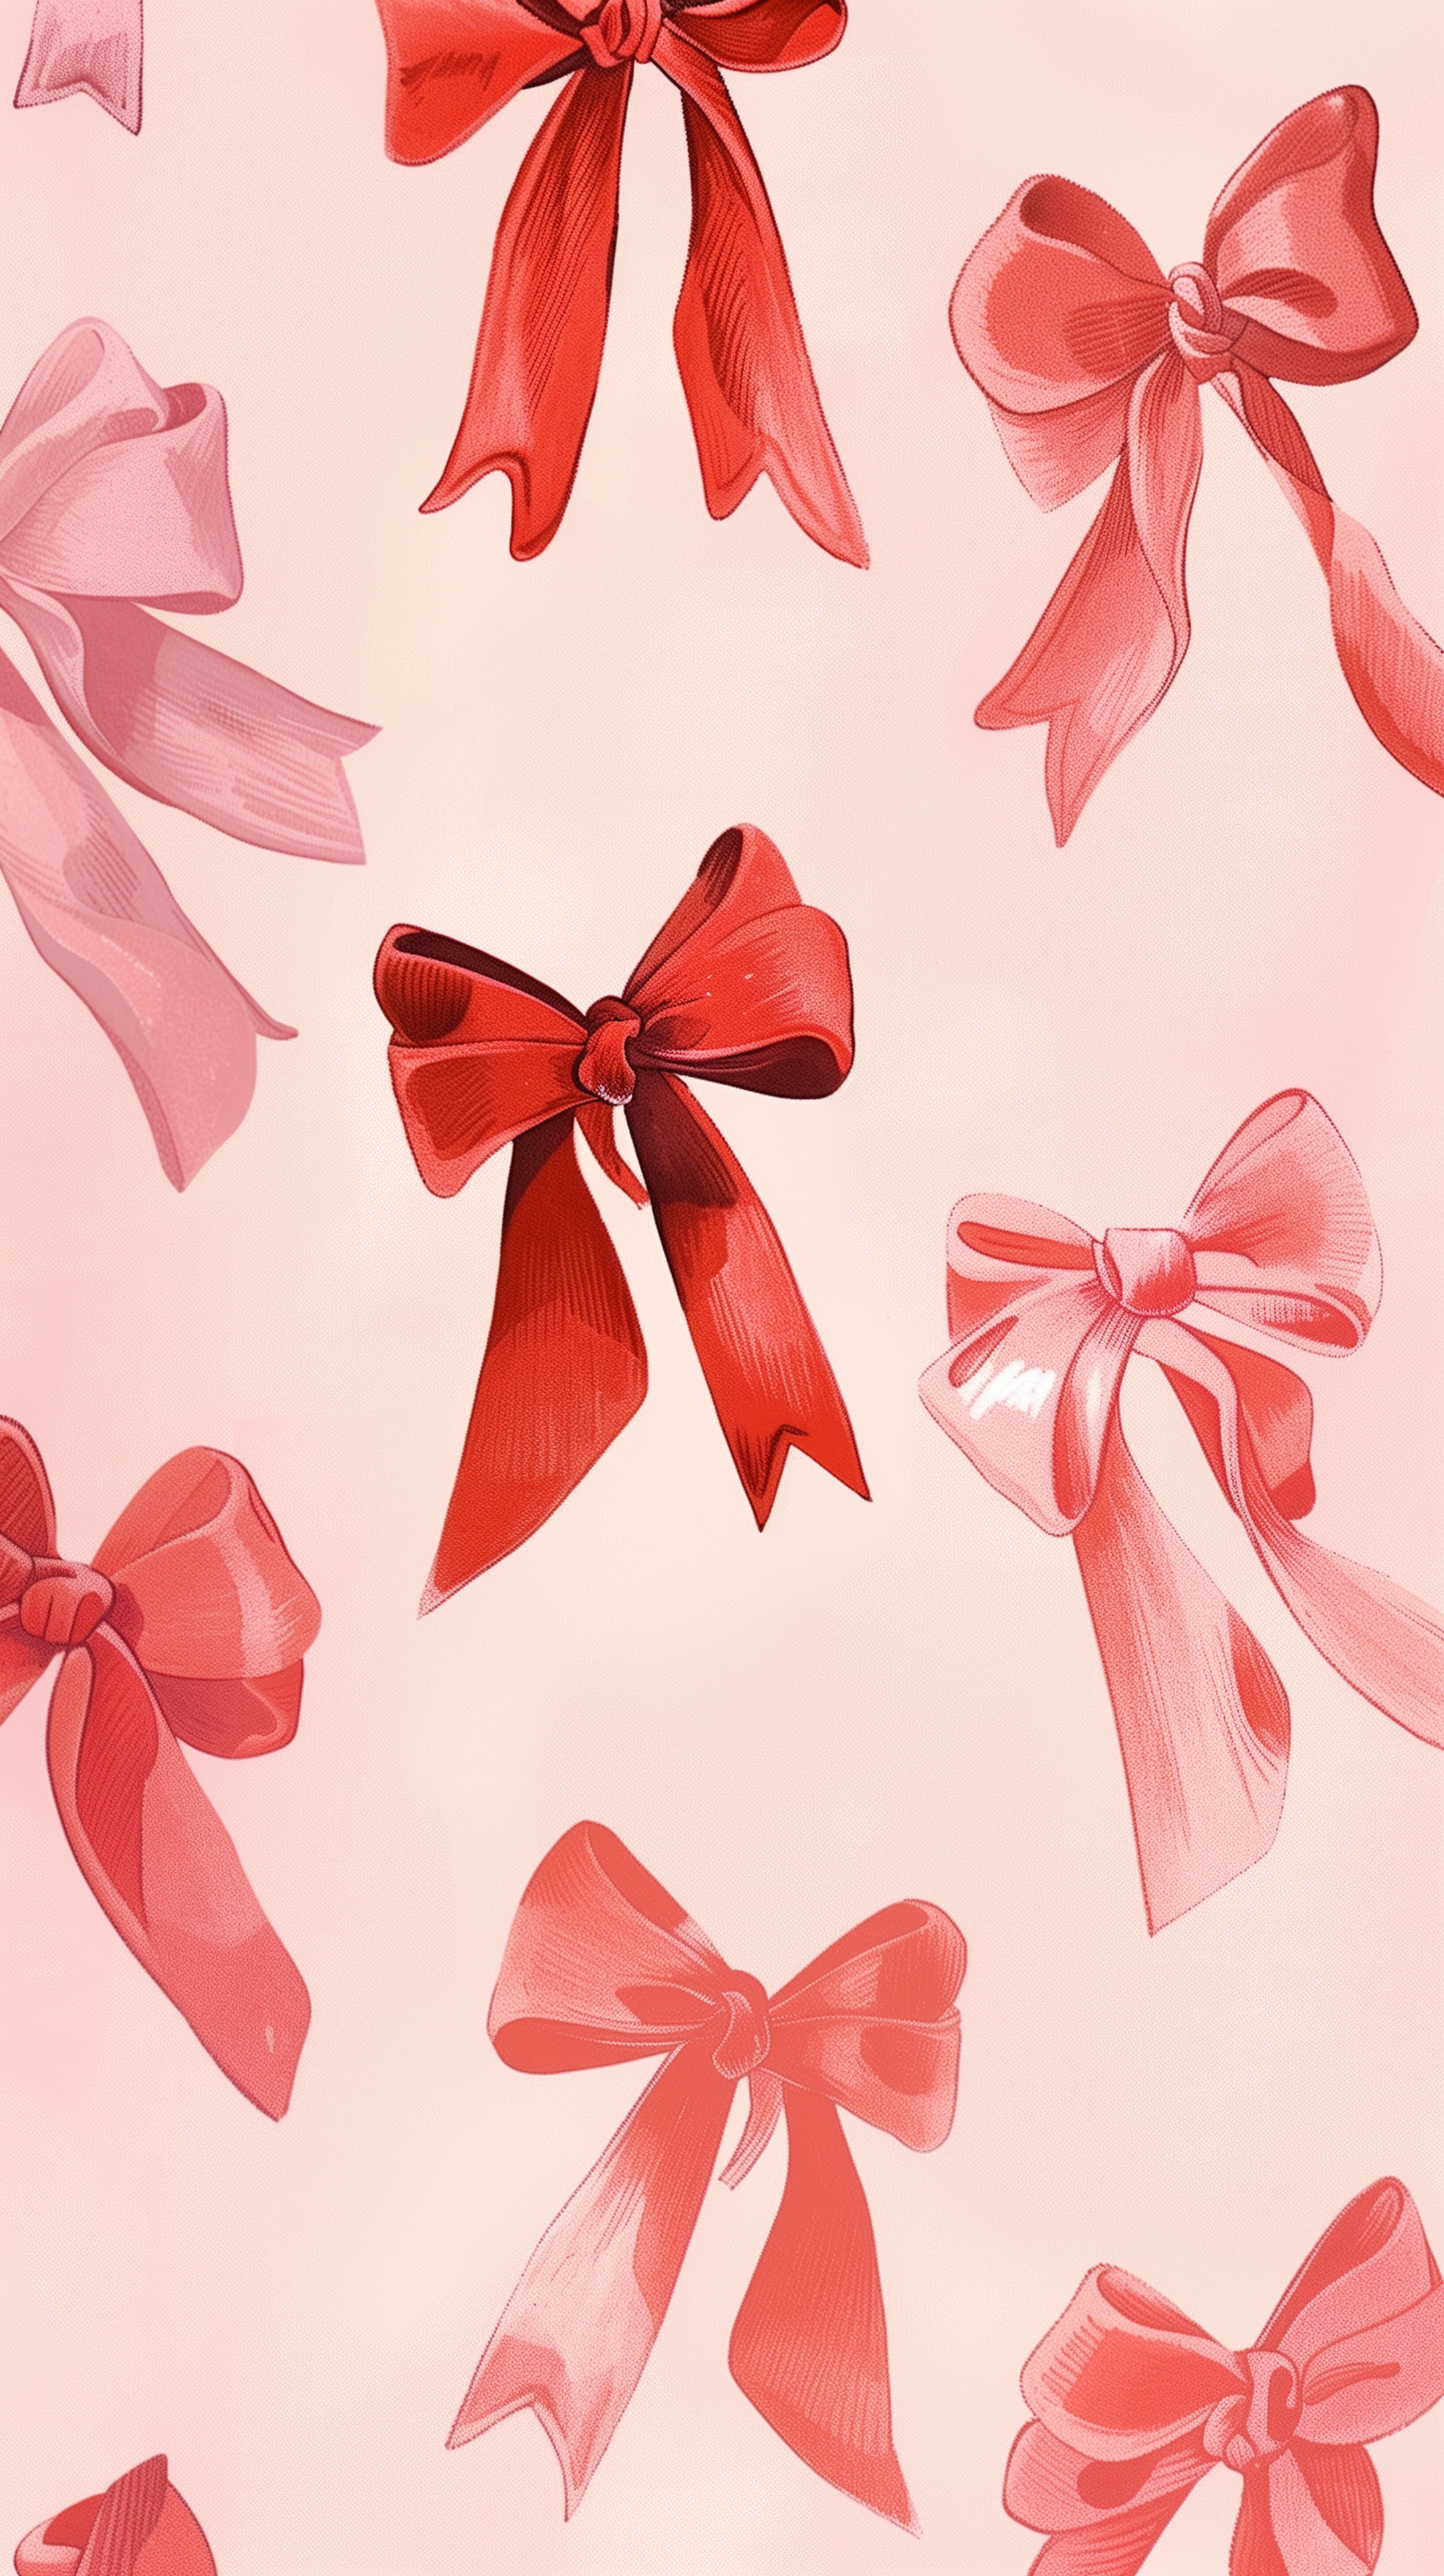 Pretty Pink Ribbons for Your Screen Taustakuva[f8723b9734e840c3ae5d]